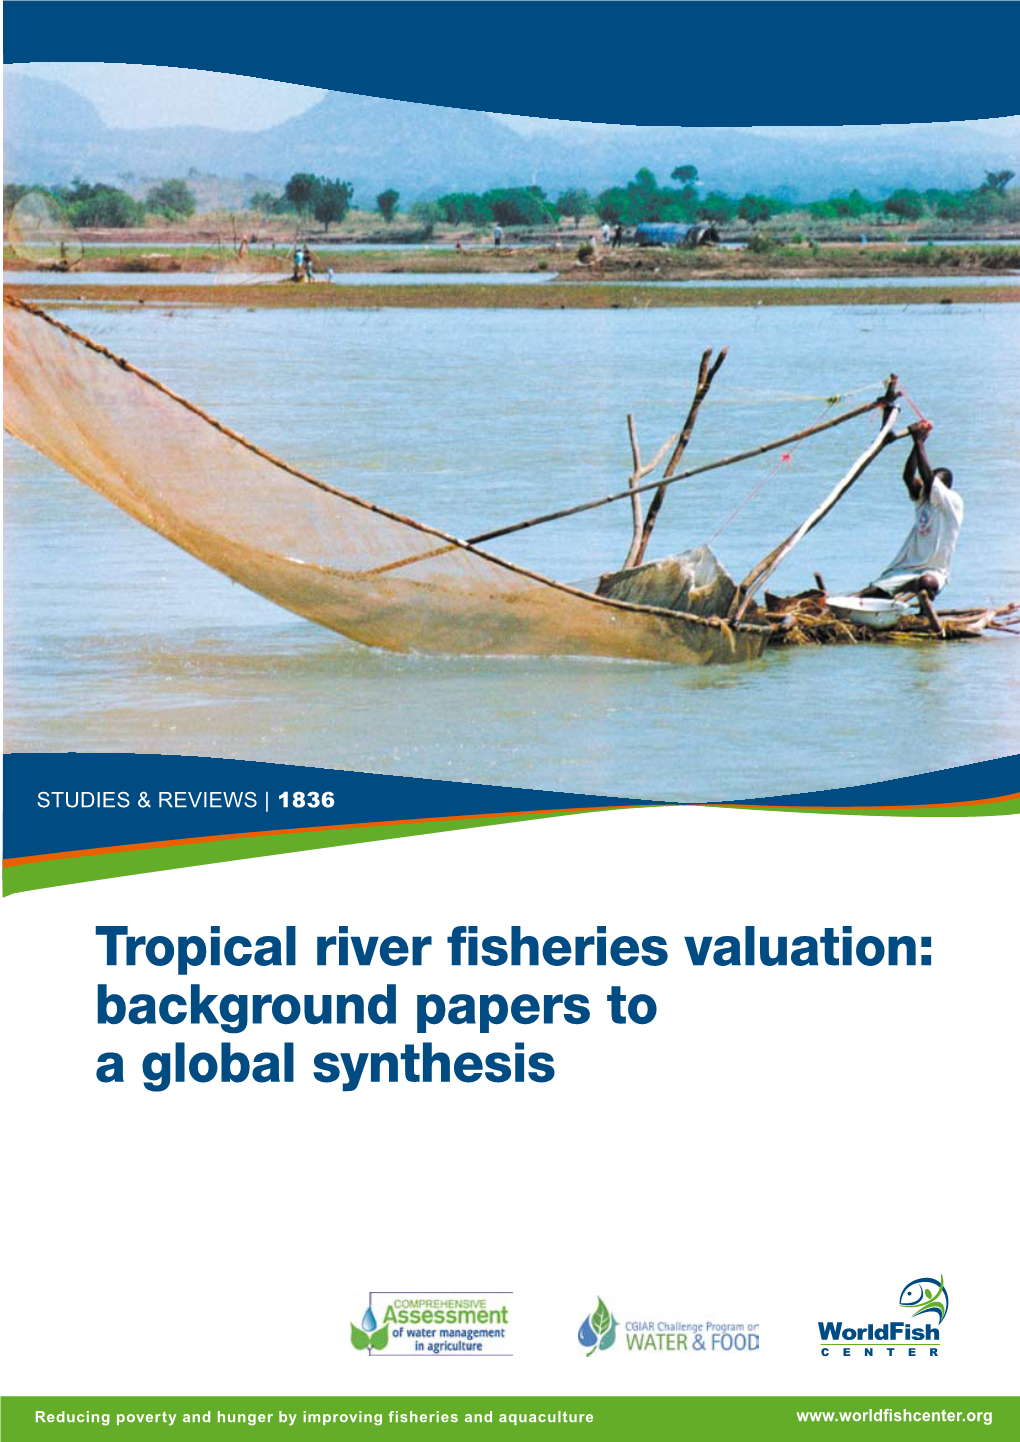 Tropical River Fisheries Valuation: Background Papers to a Global Synthesis the Worldfish Center Printed on 100% Recycled Paper